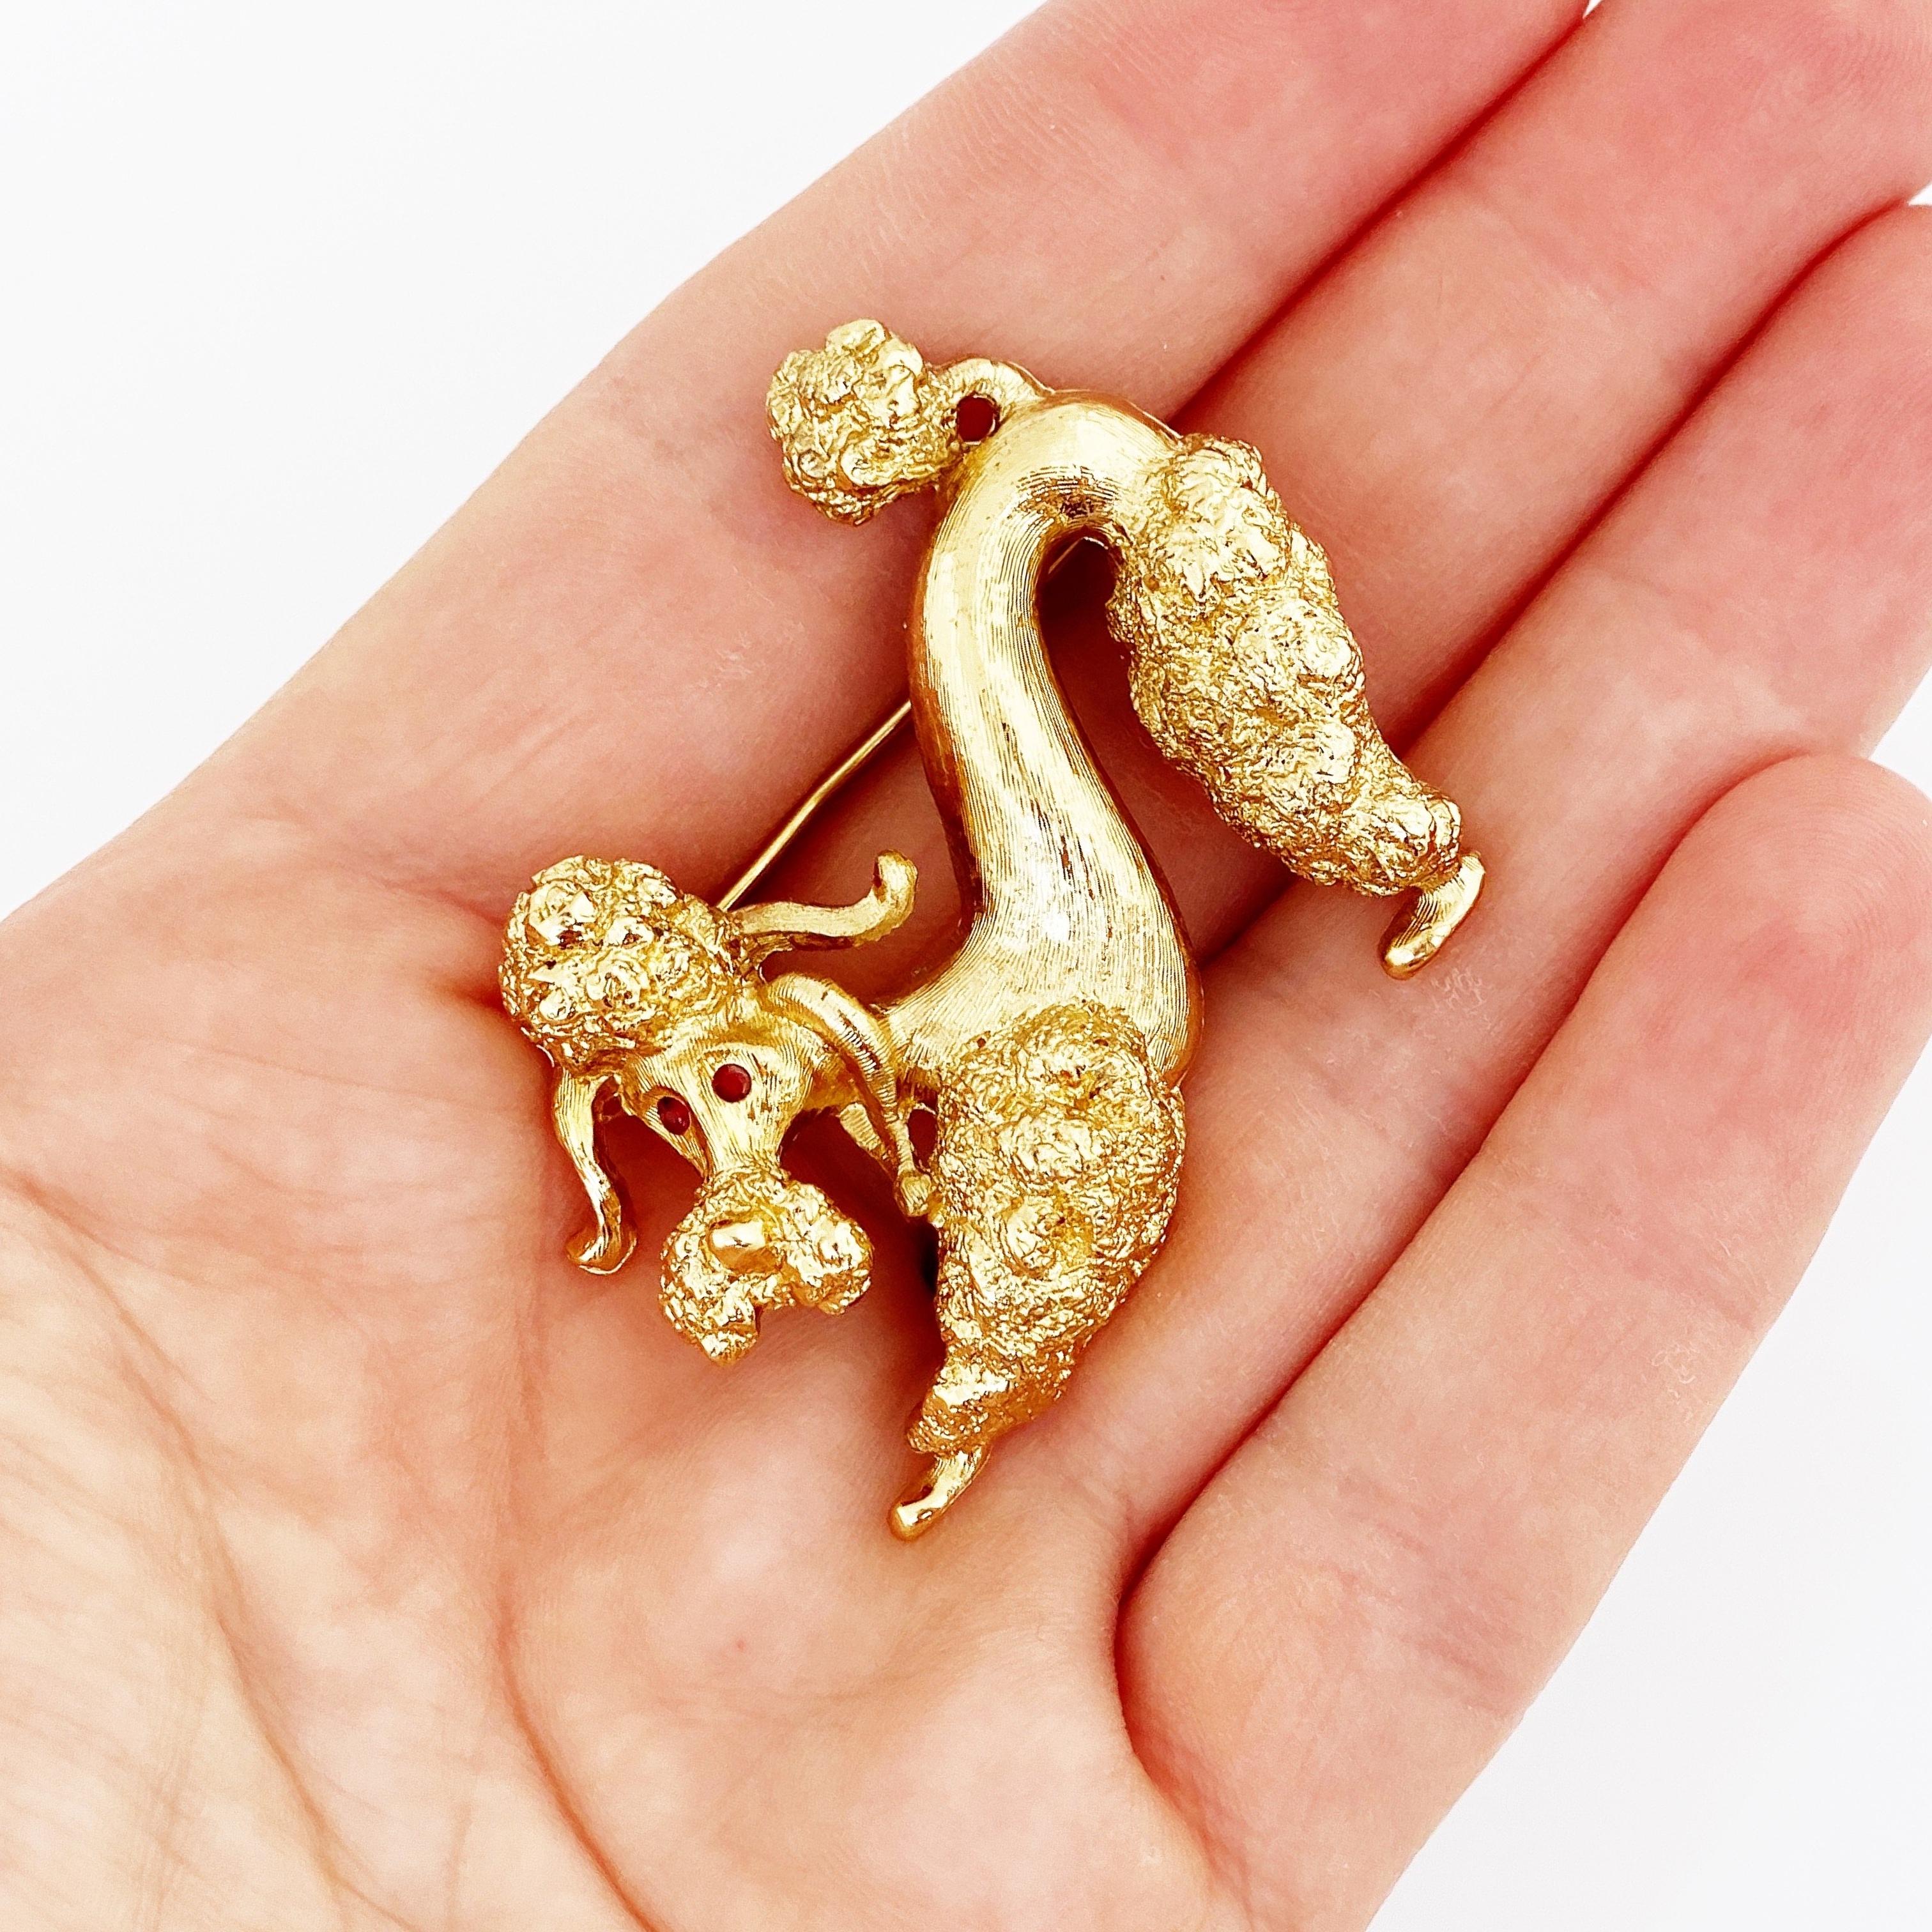 Women's Gilded Poodle Dog Figural Brooch by Monet, 1960s